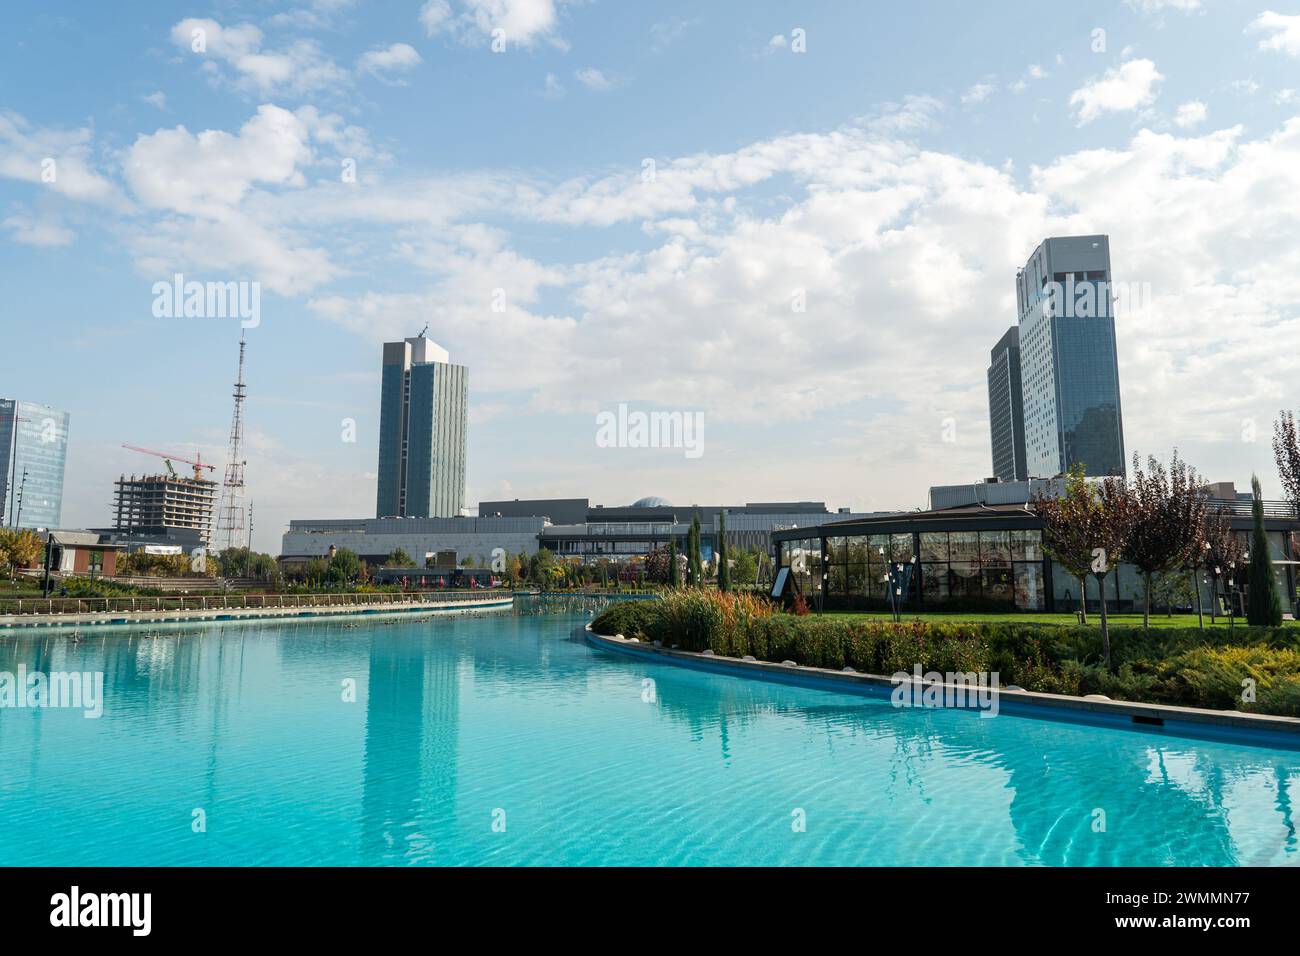 Awesome view of contemporary buildings reflected in pool of Tashkent City Park in Tashkent, Uzbekistan. park is a popular recreational gathering place Stock Photo